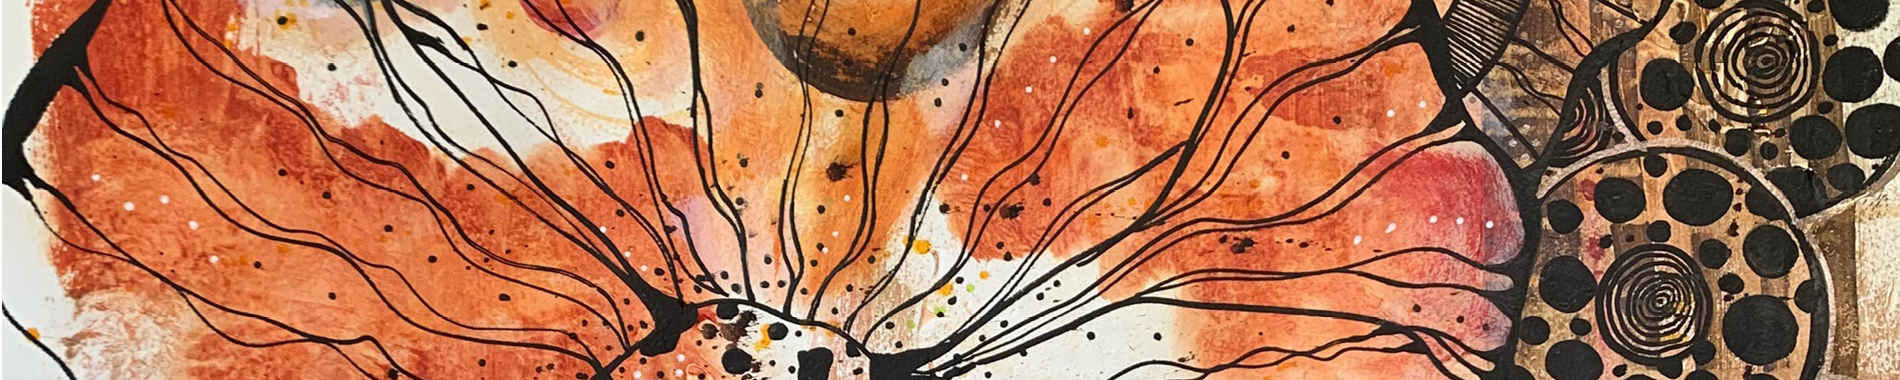 Tracey Hewitt, As Summer Fades (detail) 2019, acrylic and pen on paper. Courtesy of the artist.